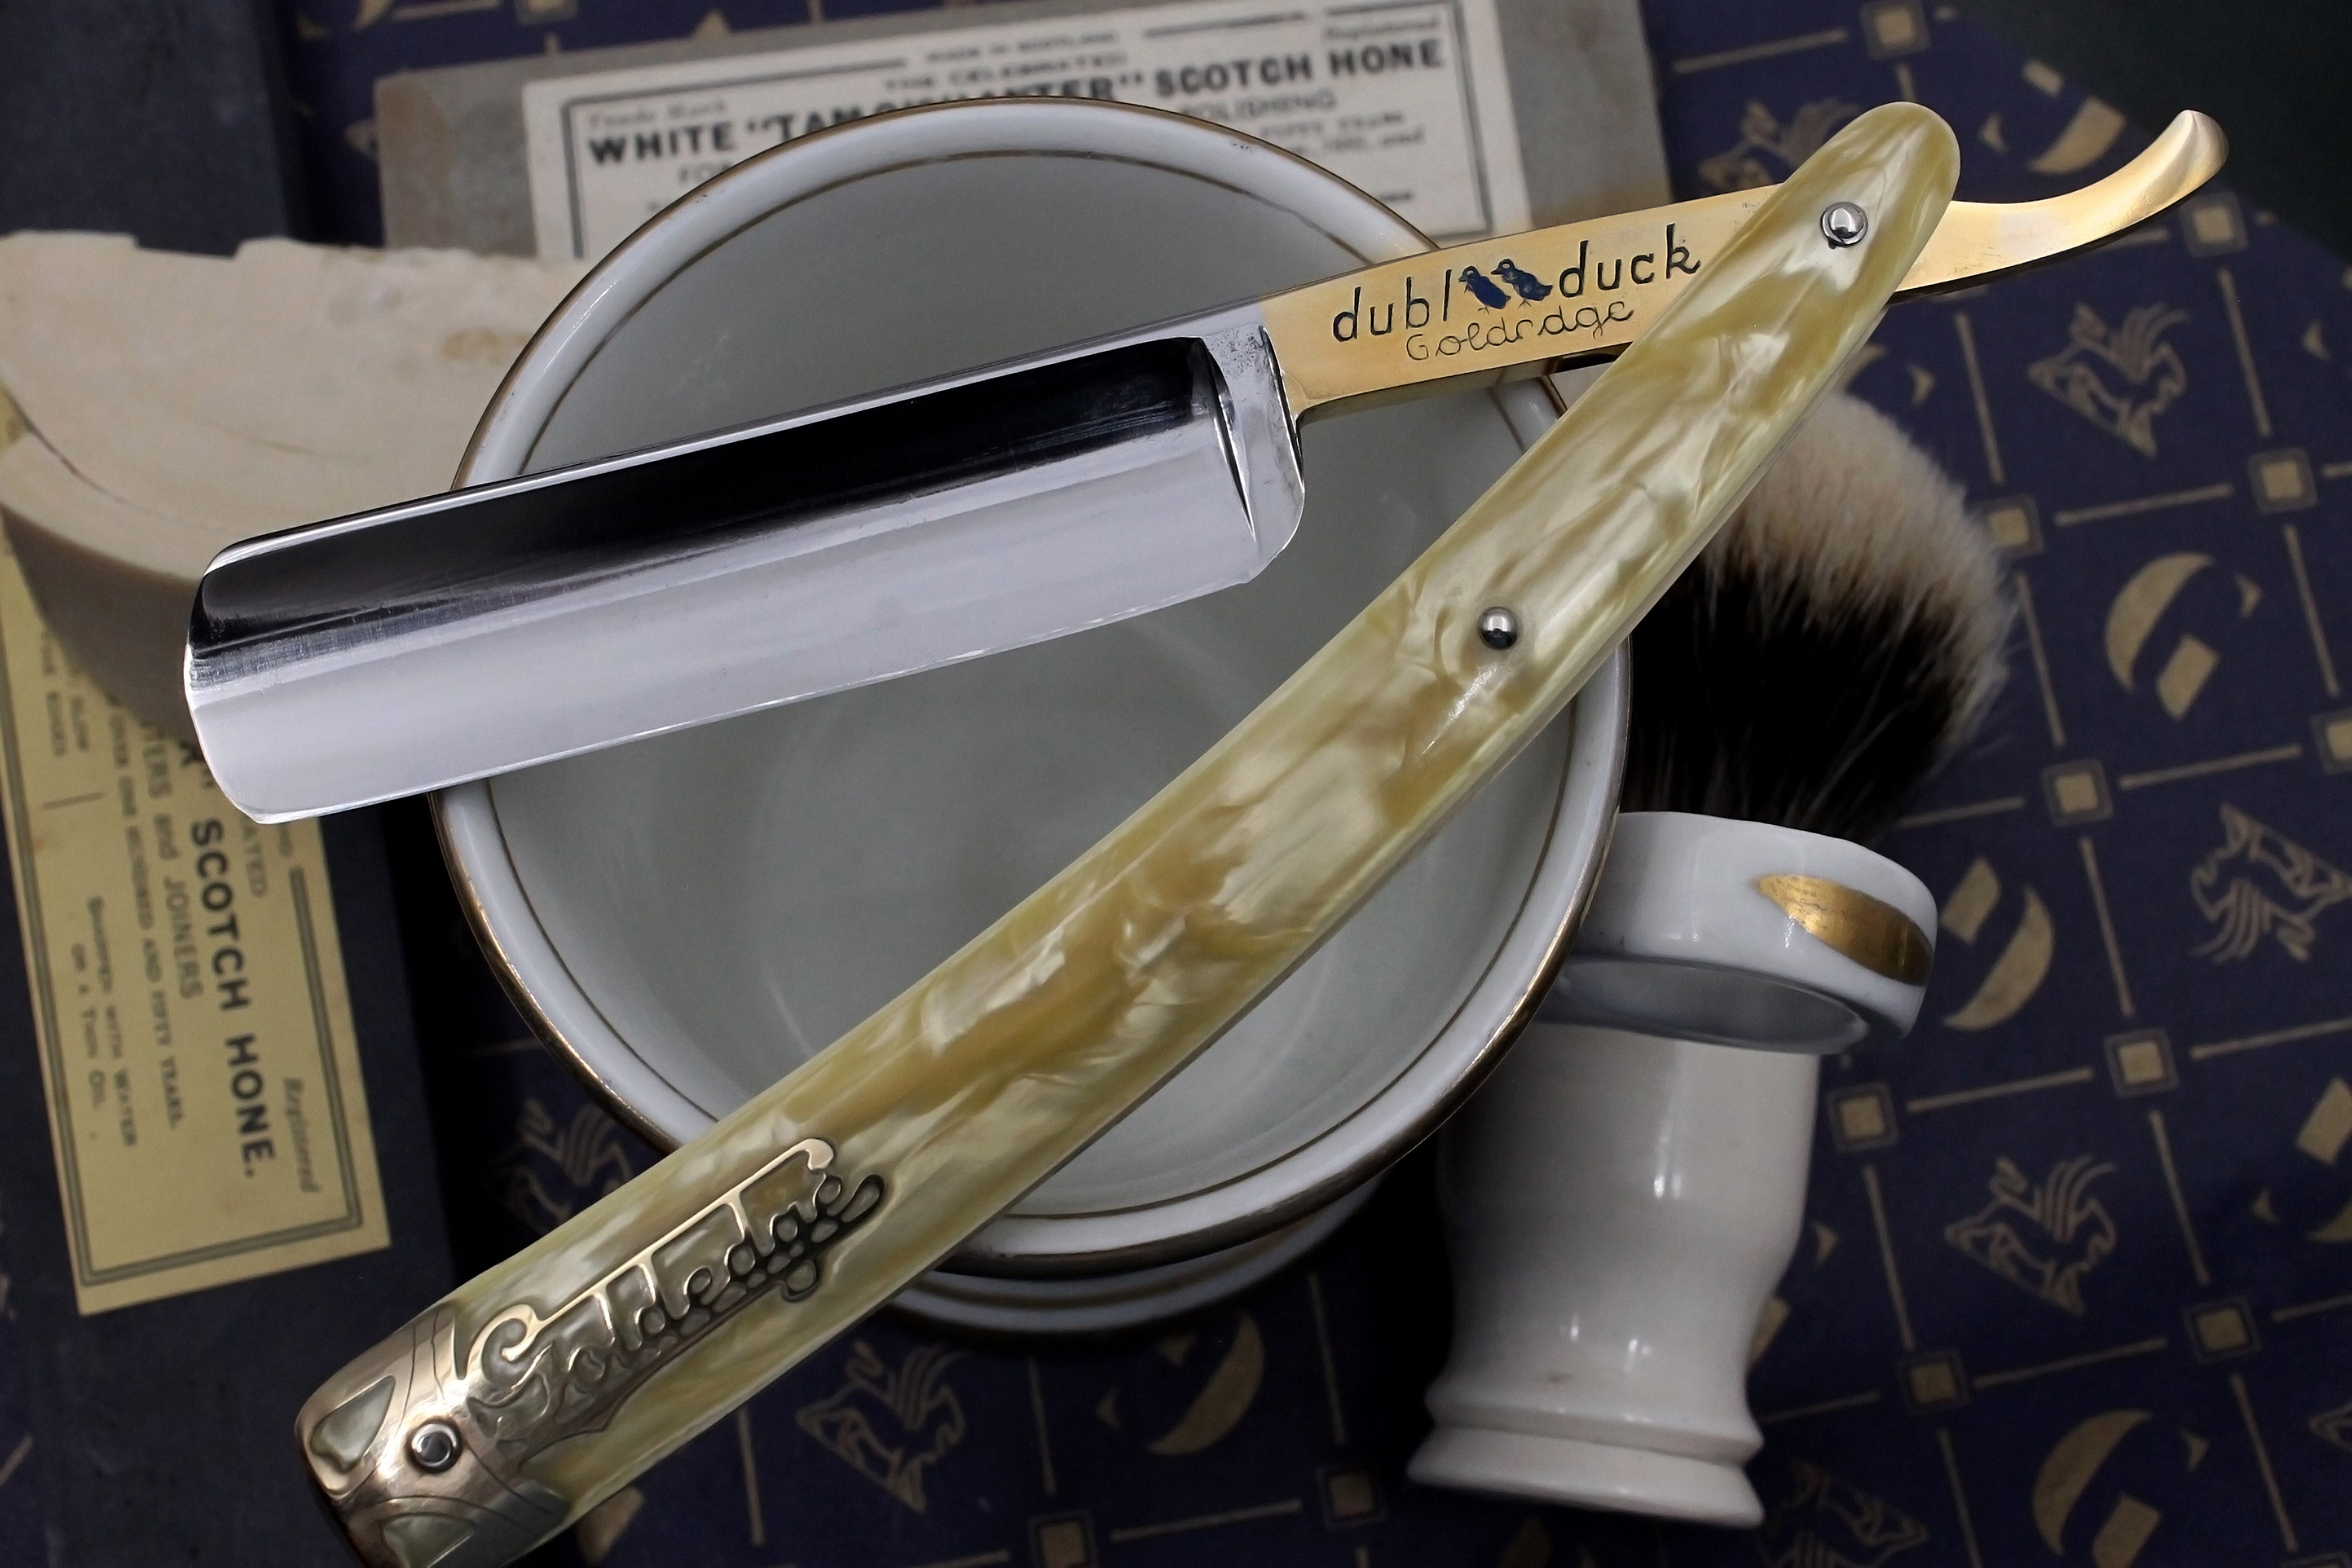 Dubl Duck Goldedge 6/8 Blade Cracked Ice Scales - Fully Restored Vintage Solingen Straight Razor - Shave Ready